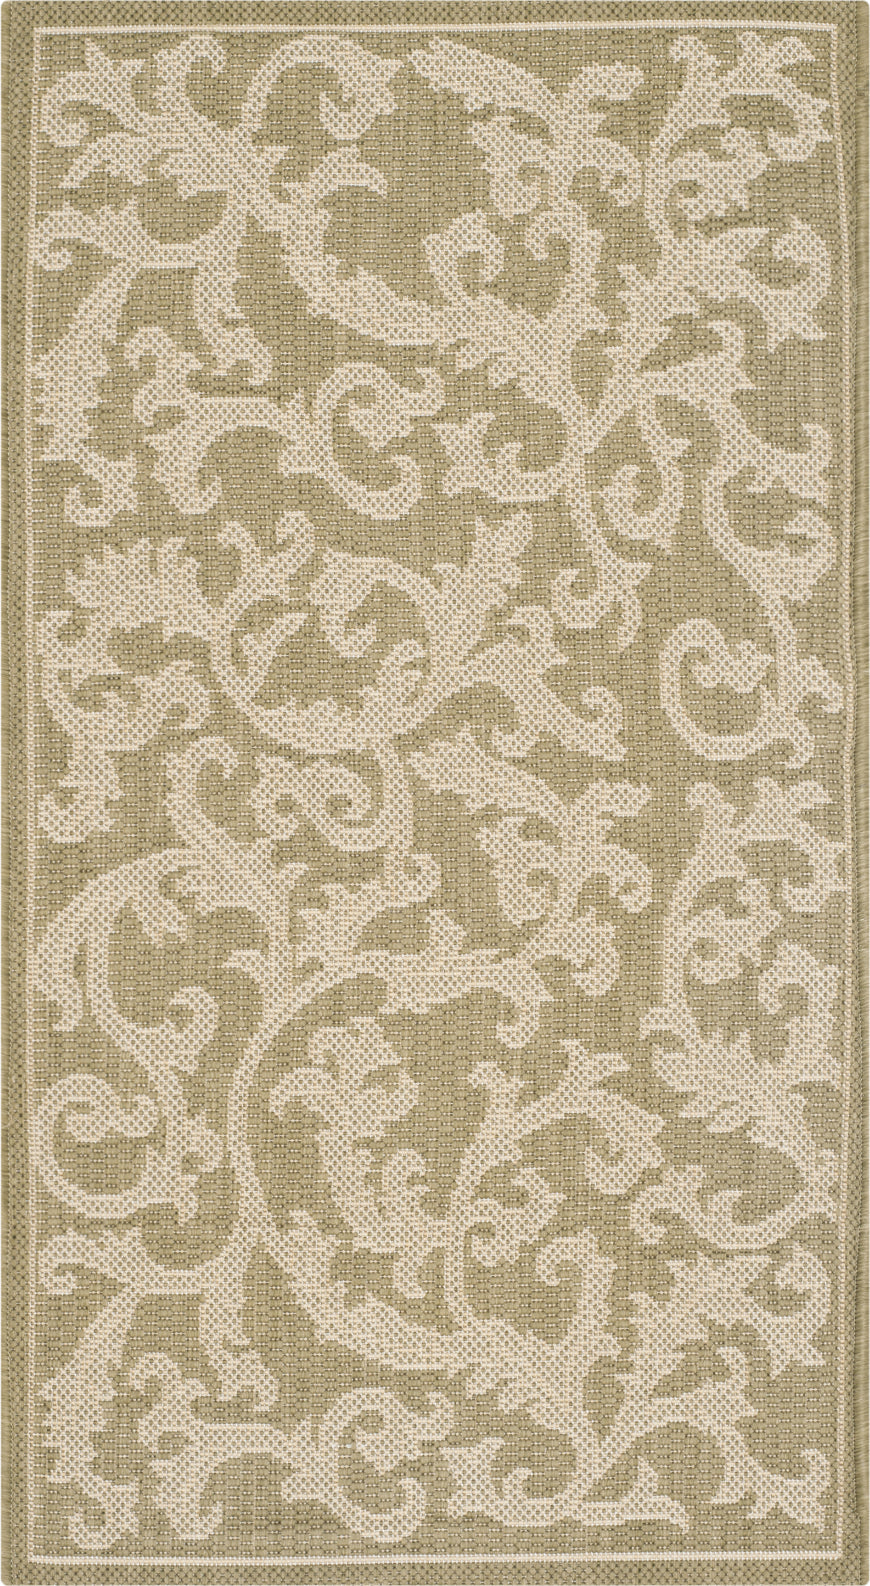 Safavieh Courtyard CY2653 Olive/Natural Area Rug main image